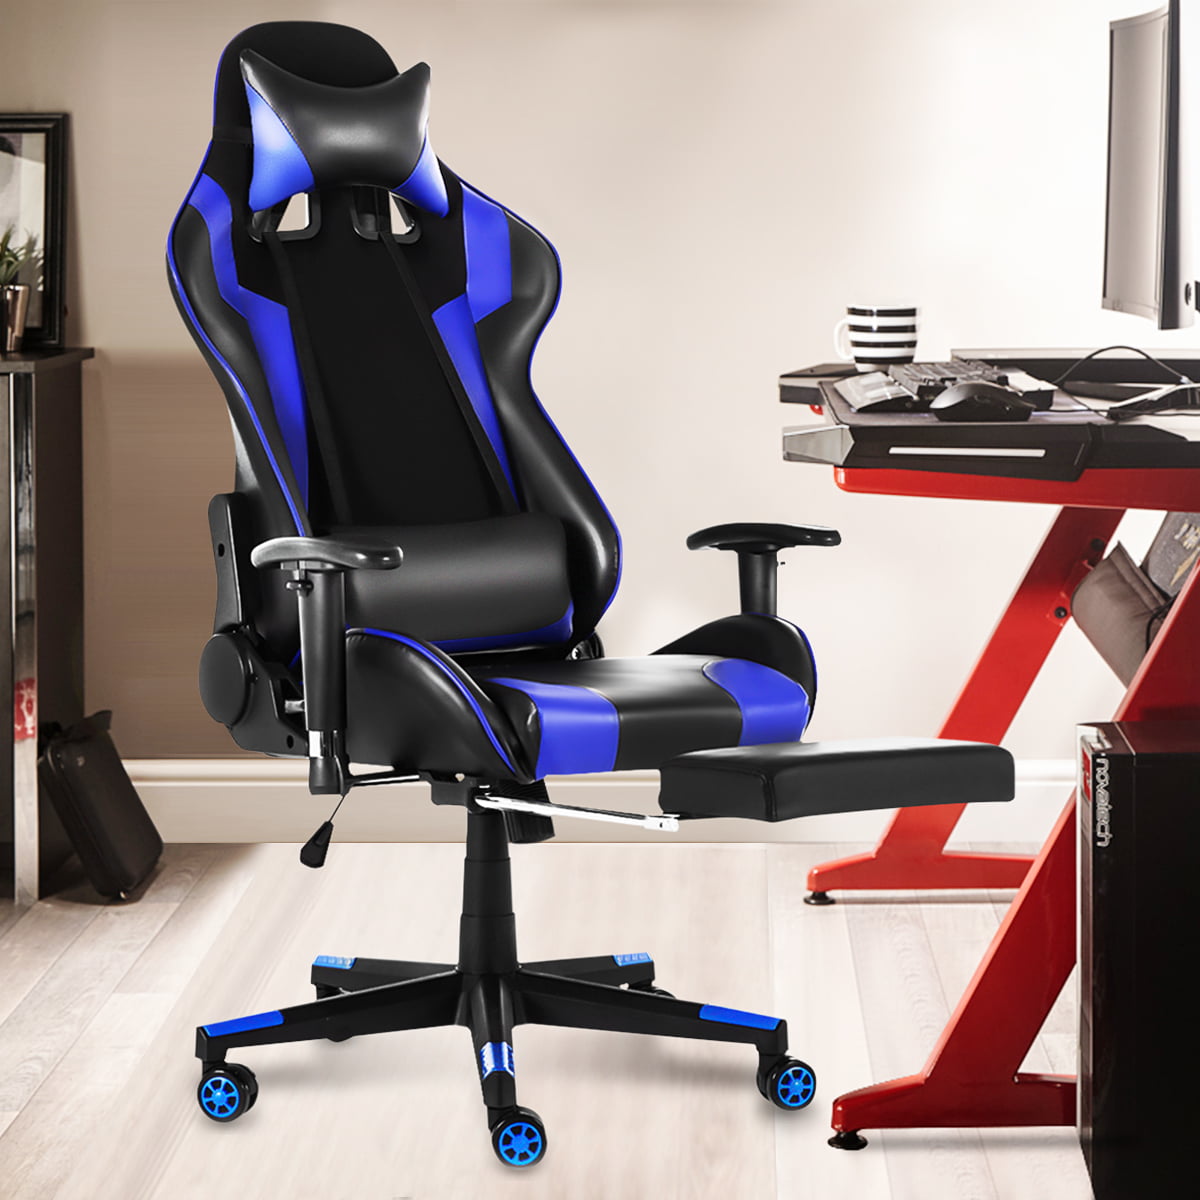 Swivel Gaming Chair Racing Ergonomic Recliner Office Computer Desk Seat Chairs 